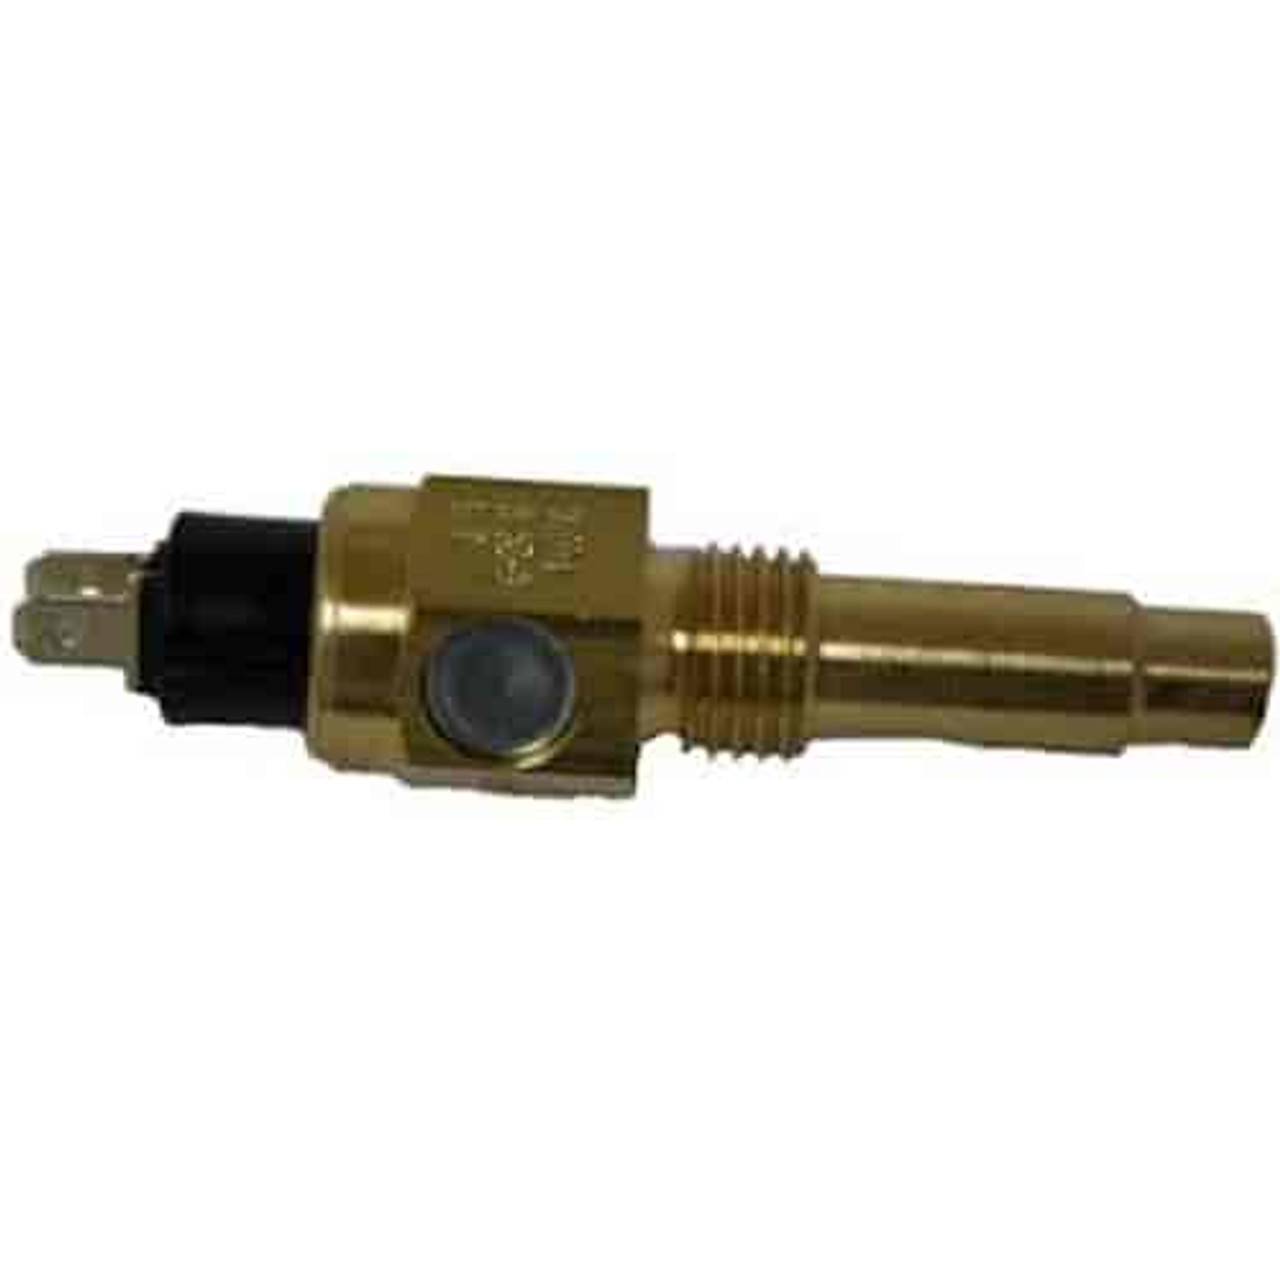 VDO Temperature Sender 250 Degrees F/ 120 C, Part Number #323-102, 14n x 1.5 Thread.

Single Station (for one gauge), Standard Ground. For use with VDO or other Mfgs. 10-180 Ohm Range Gauges.



INSTALL NOTE: Sender Threads are Self-Sealing. Use of Sealing Compounds Will Affect Sender Output.

          Can't Find What You are looking for... Contact our Technical Support Staff!